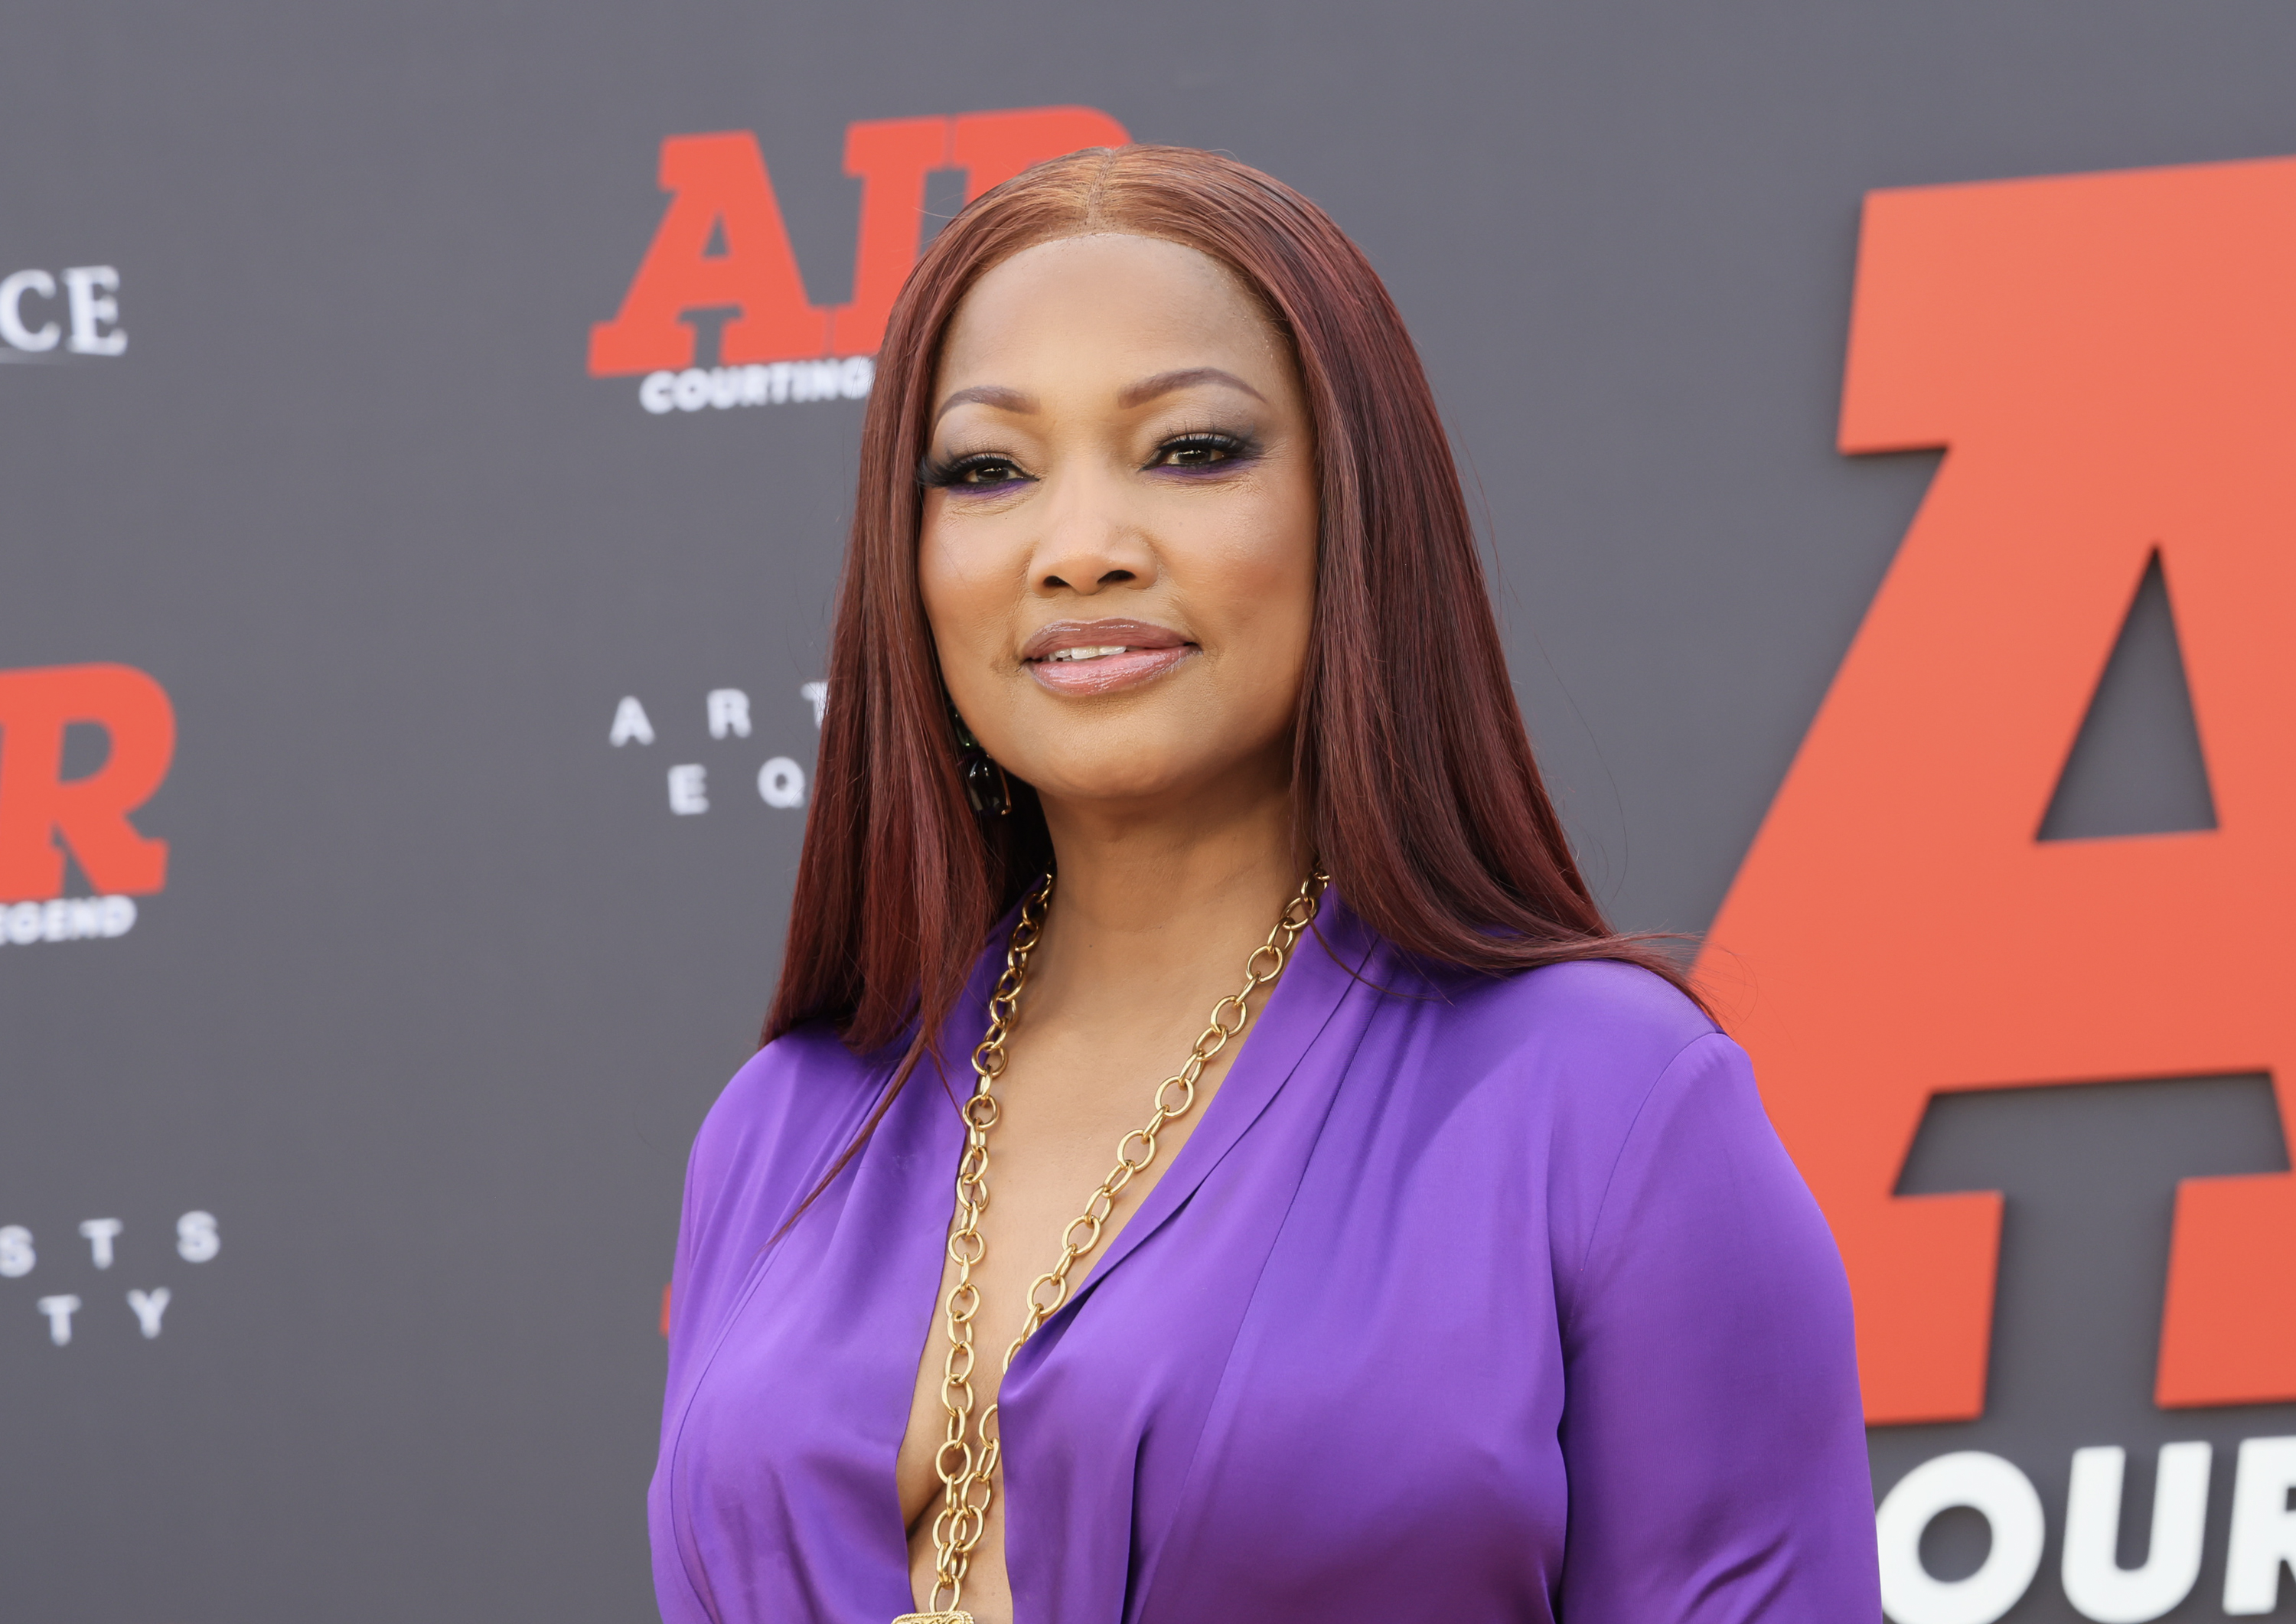 Lawsuit Demanding 'RHOBH' Star Garcelle Beauvais Pay Up Over Facebook Post  Dismissed